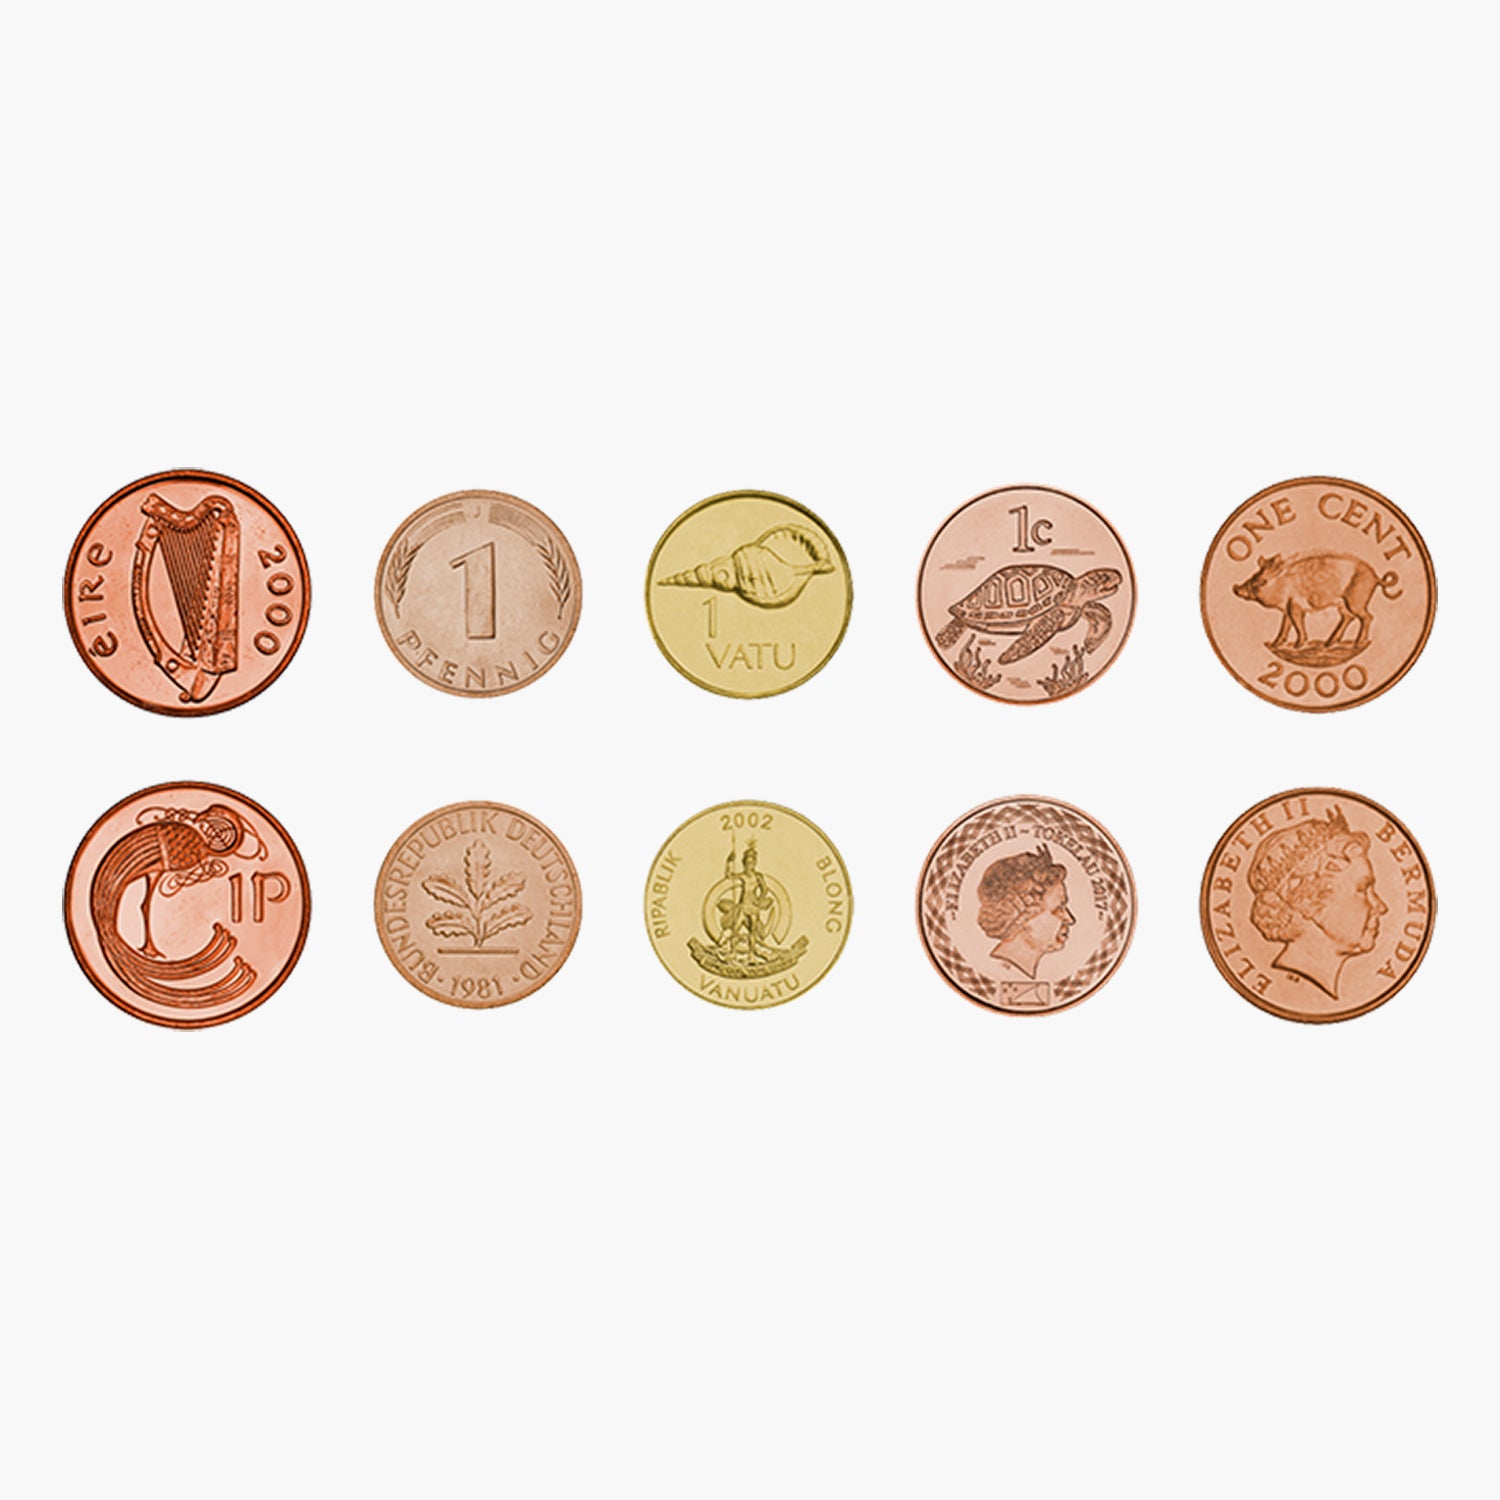 The Five Lucky Coins